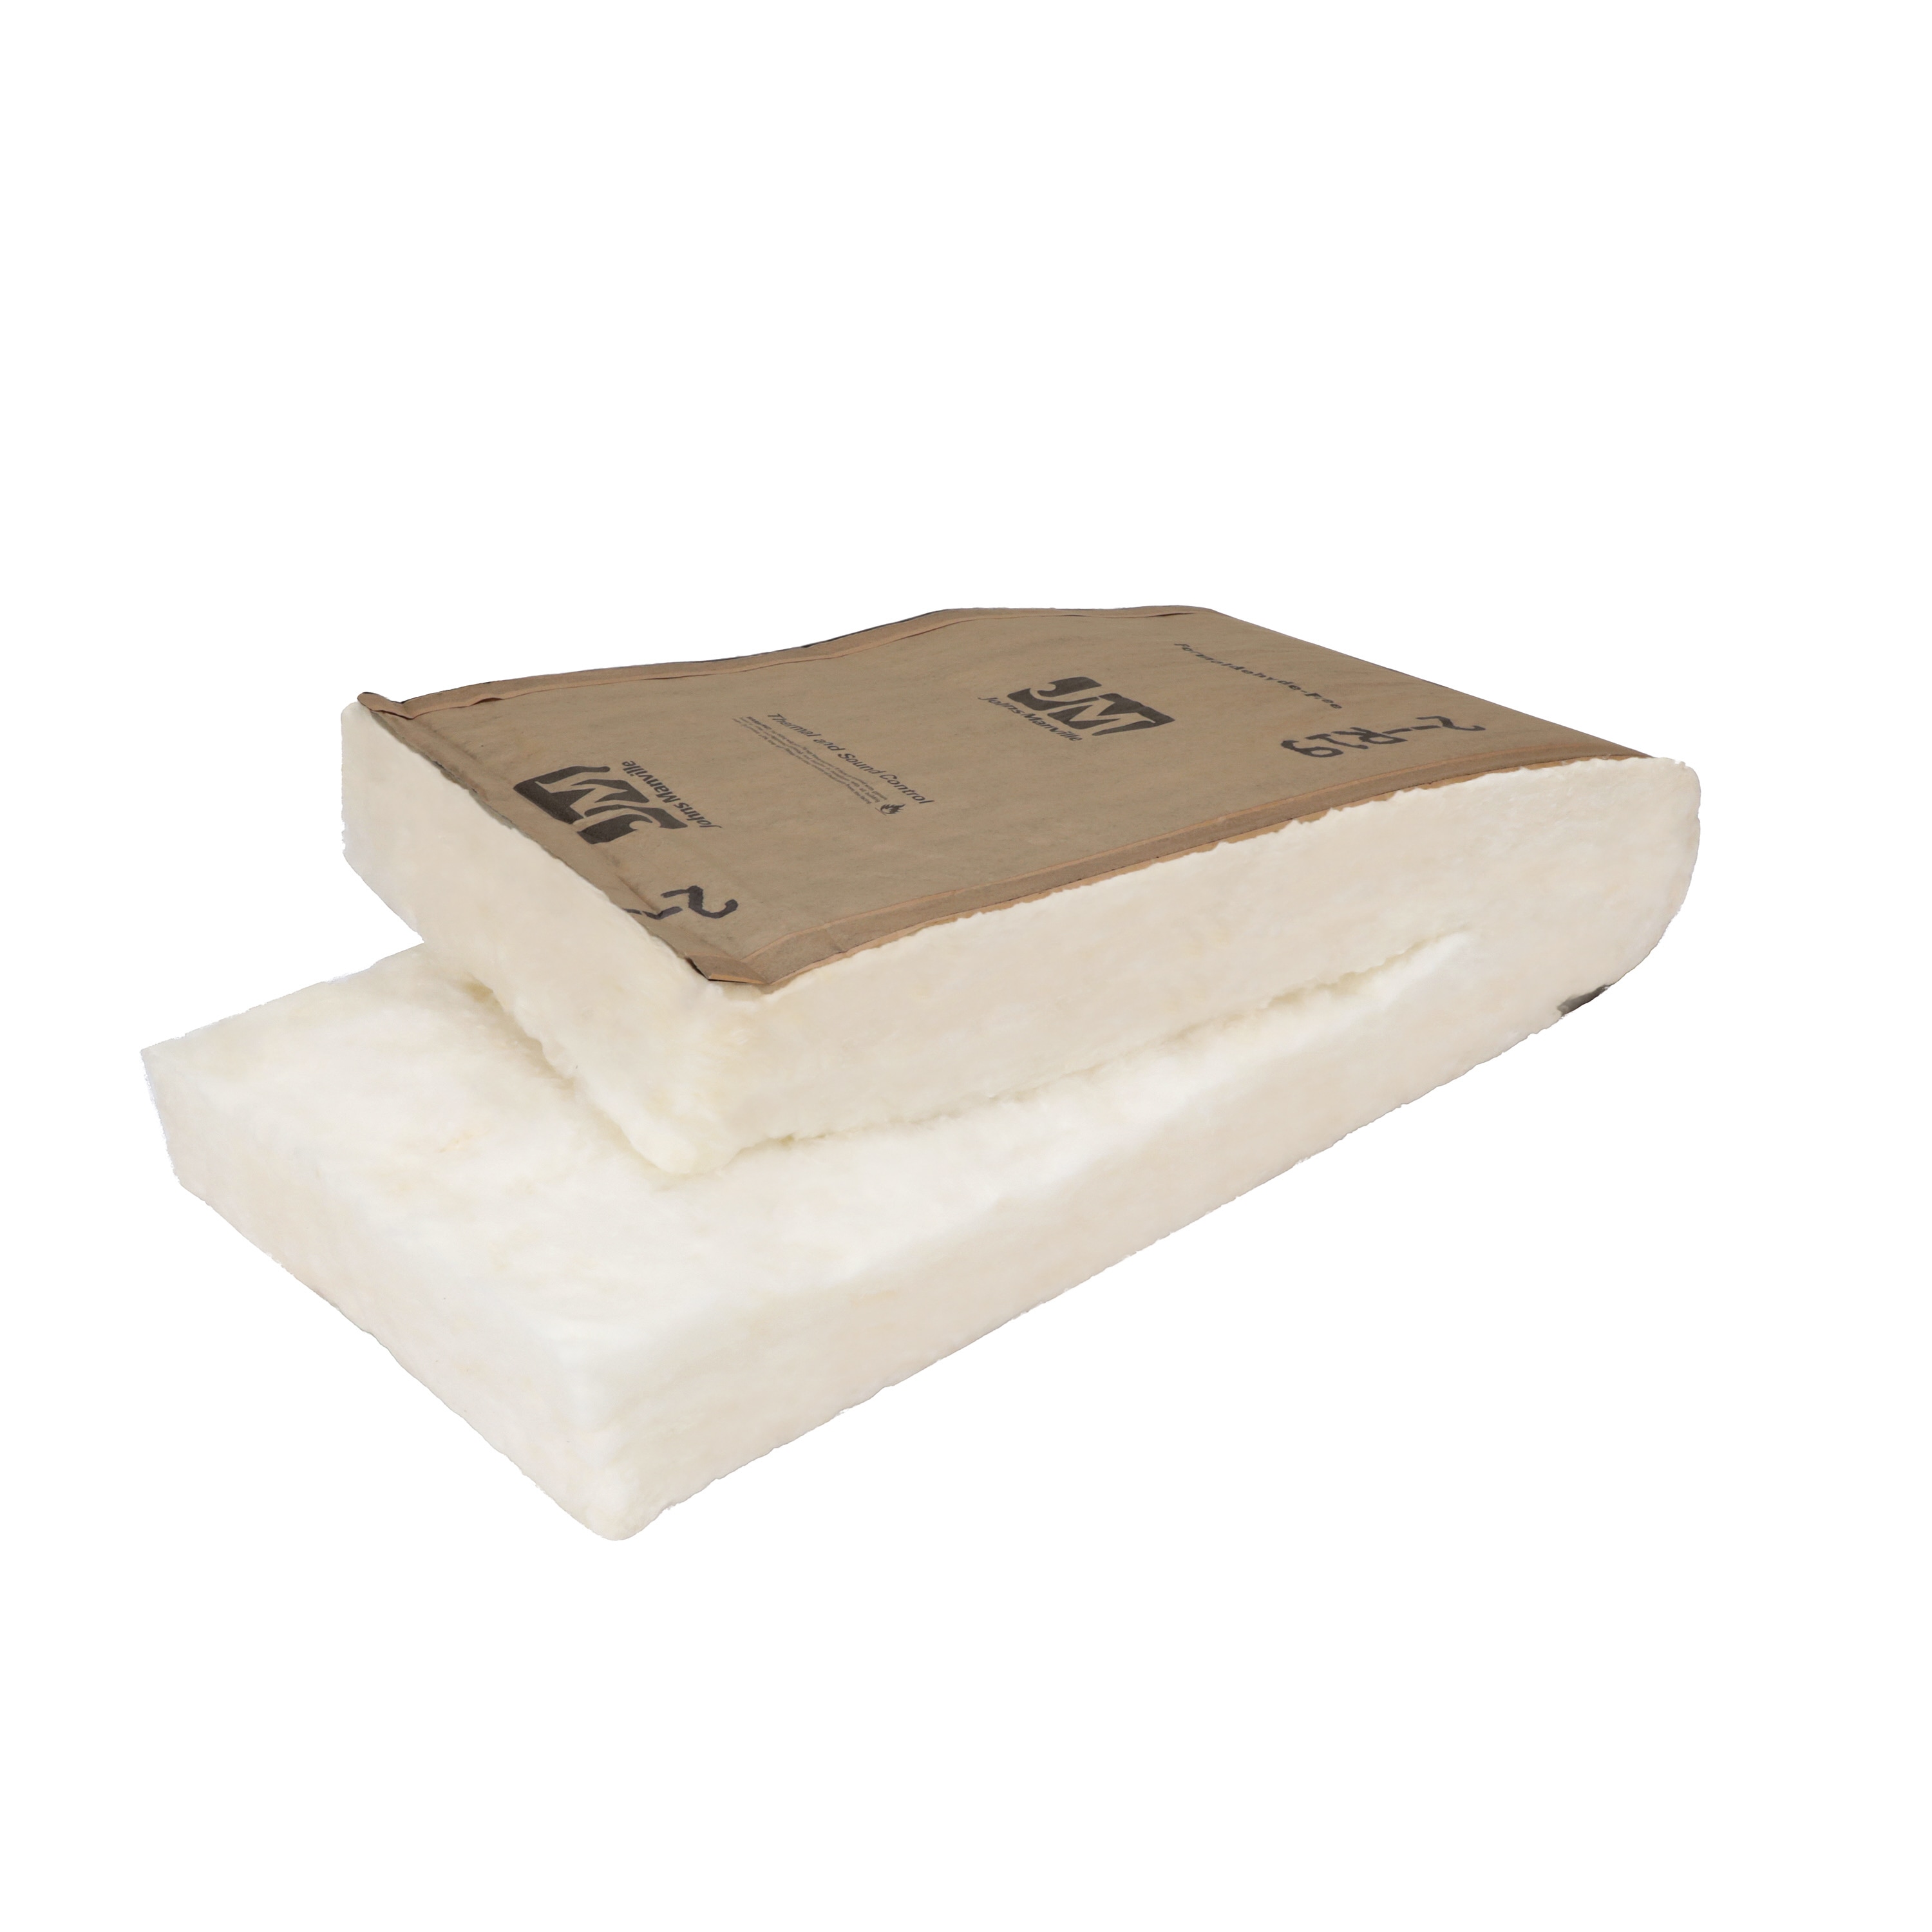 Thermal-acoustic insulation - COMFORTTHERM® - Johns Manville - fiberglass /  roll / fire-resistant